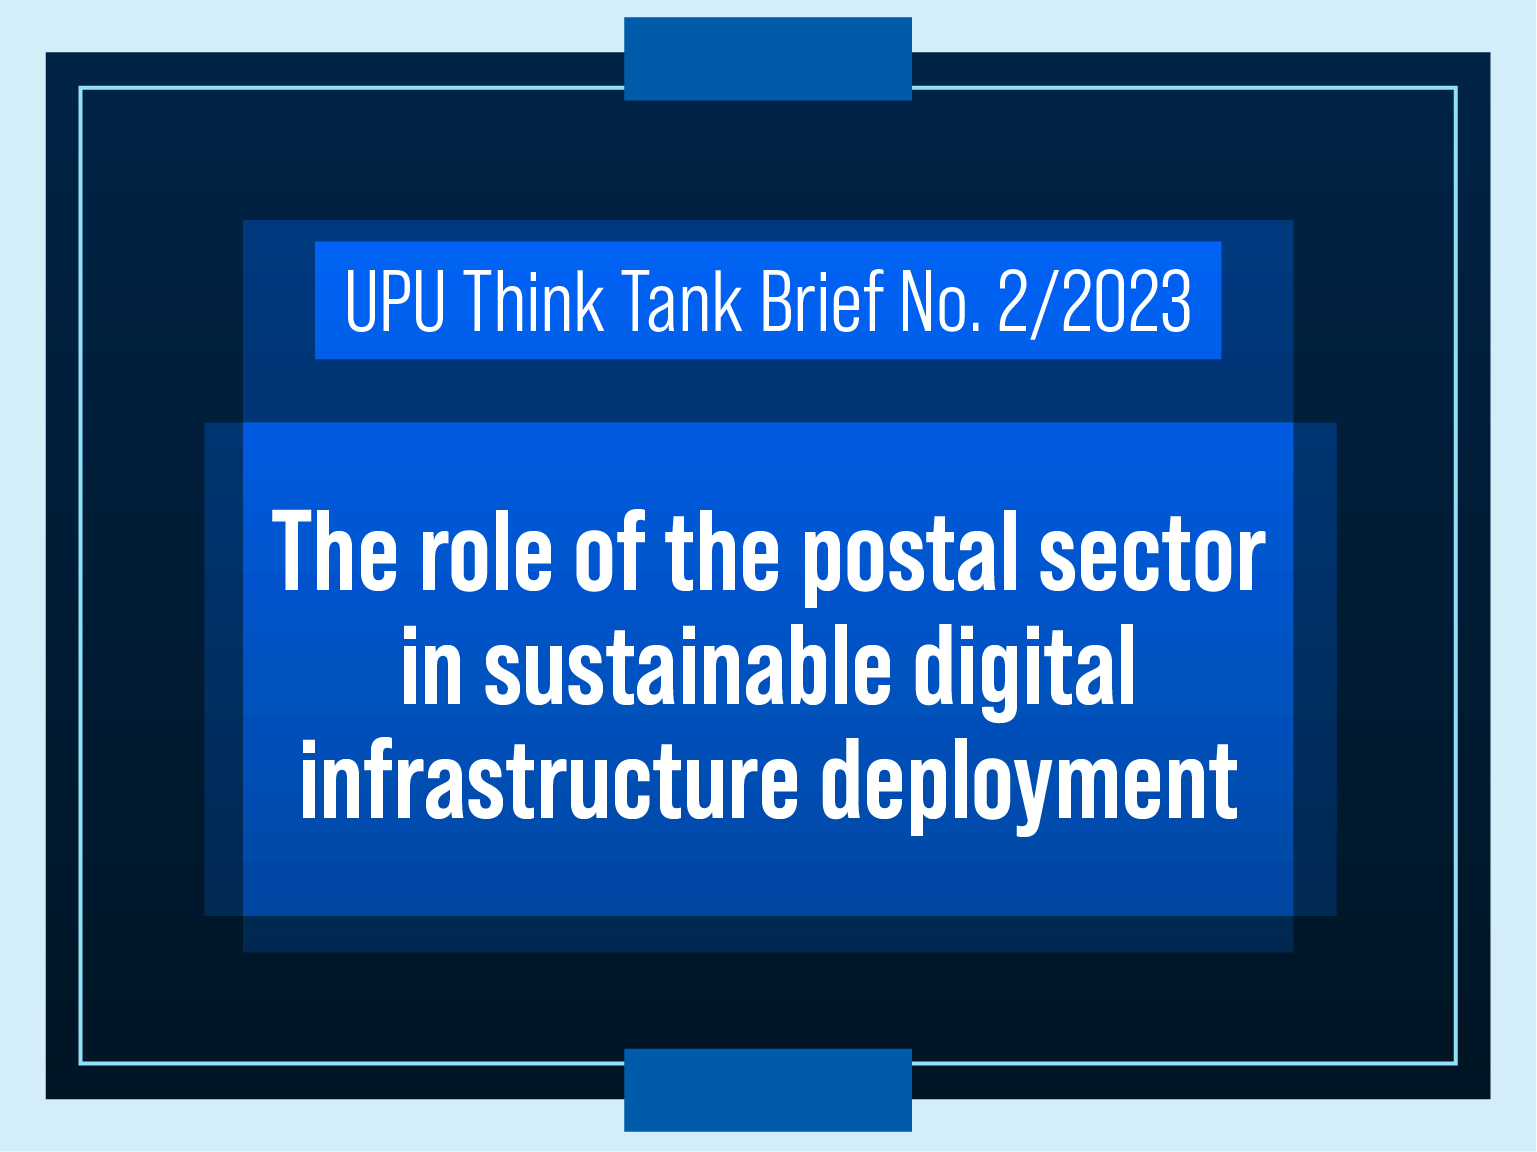 The Role of the Postal Sector in sustainable digital infrastructure deployment